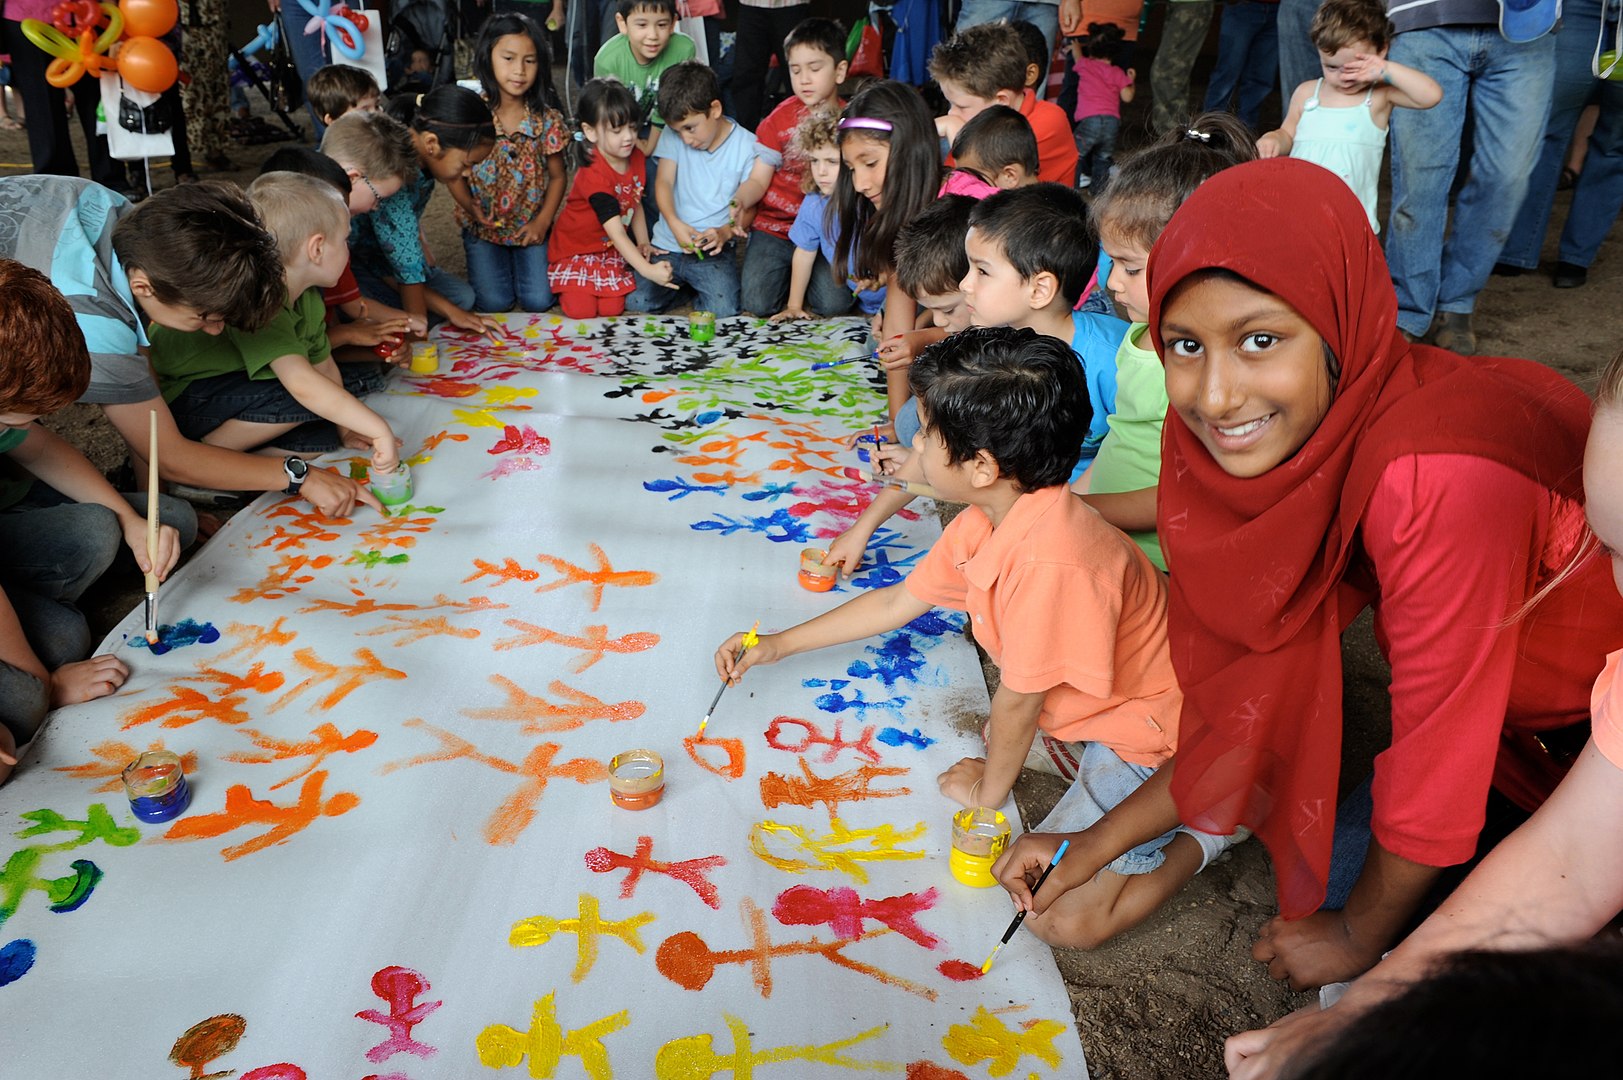 Photo of a group of young people from different cultures painting on a large piece of paper on the ground.